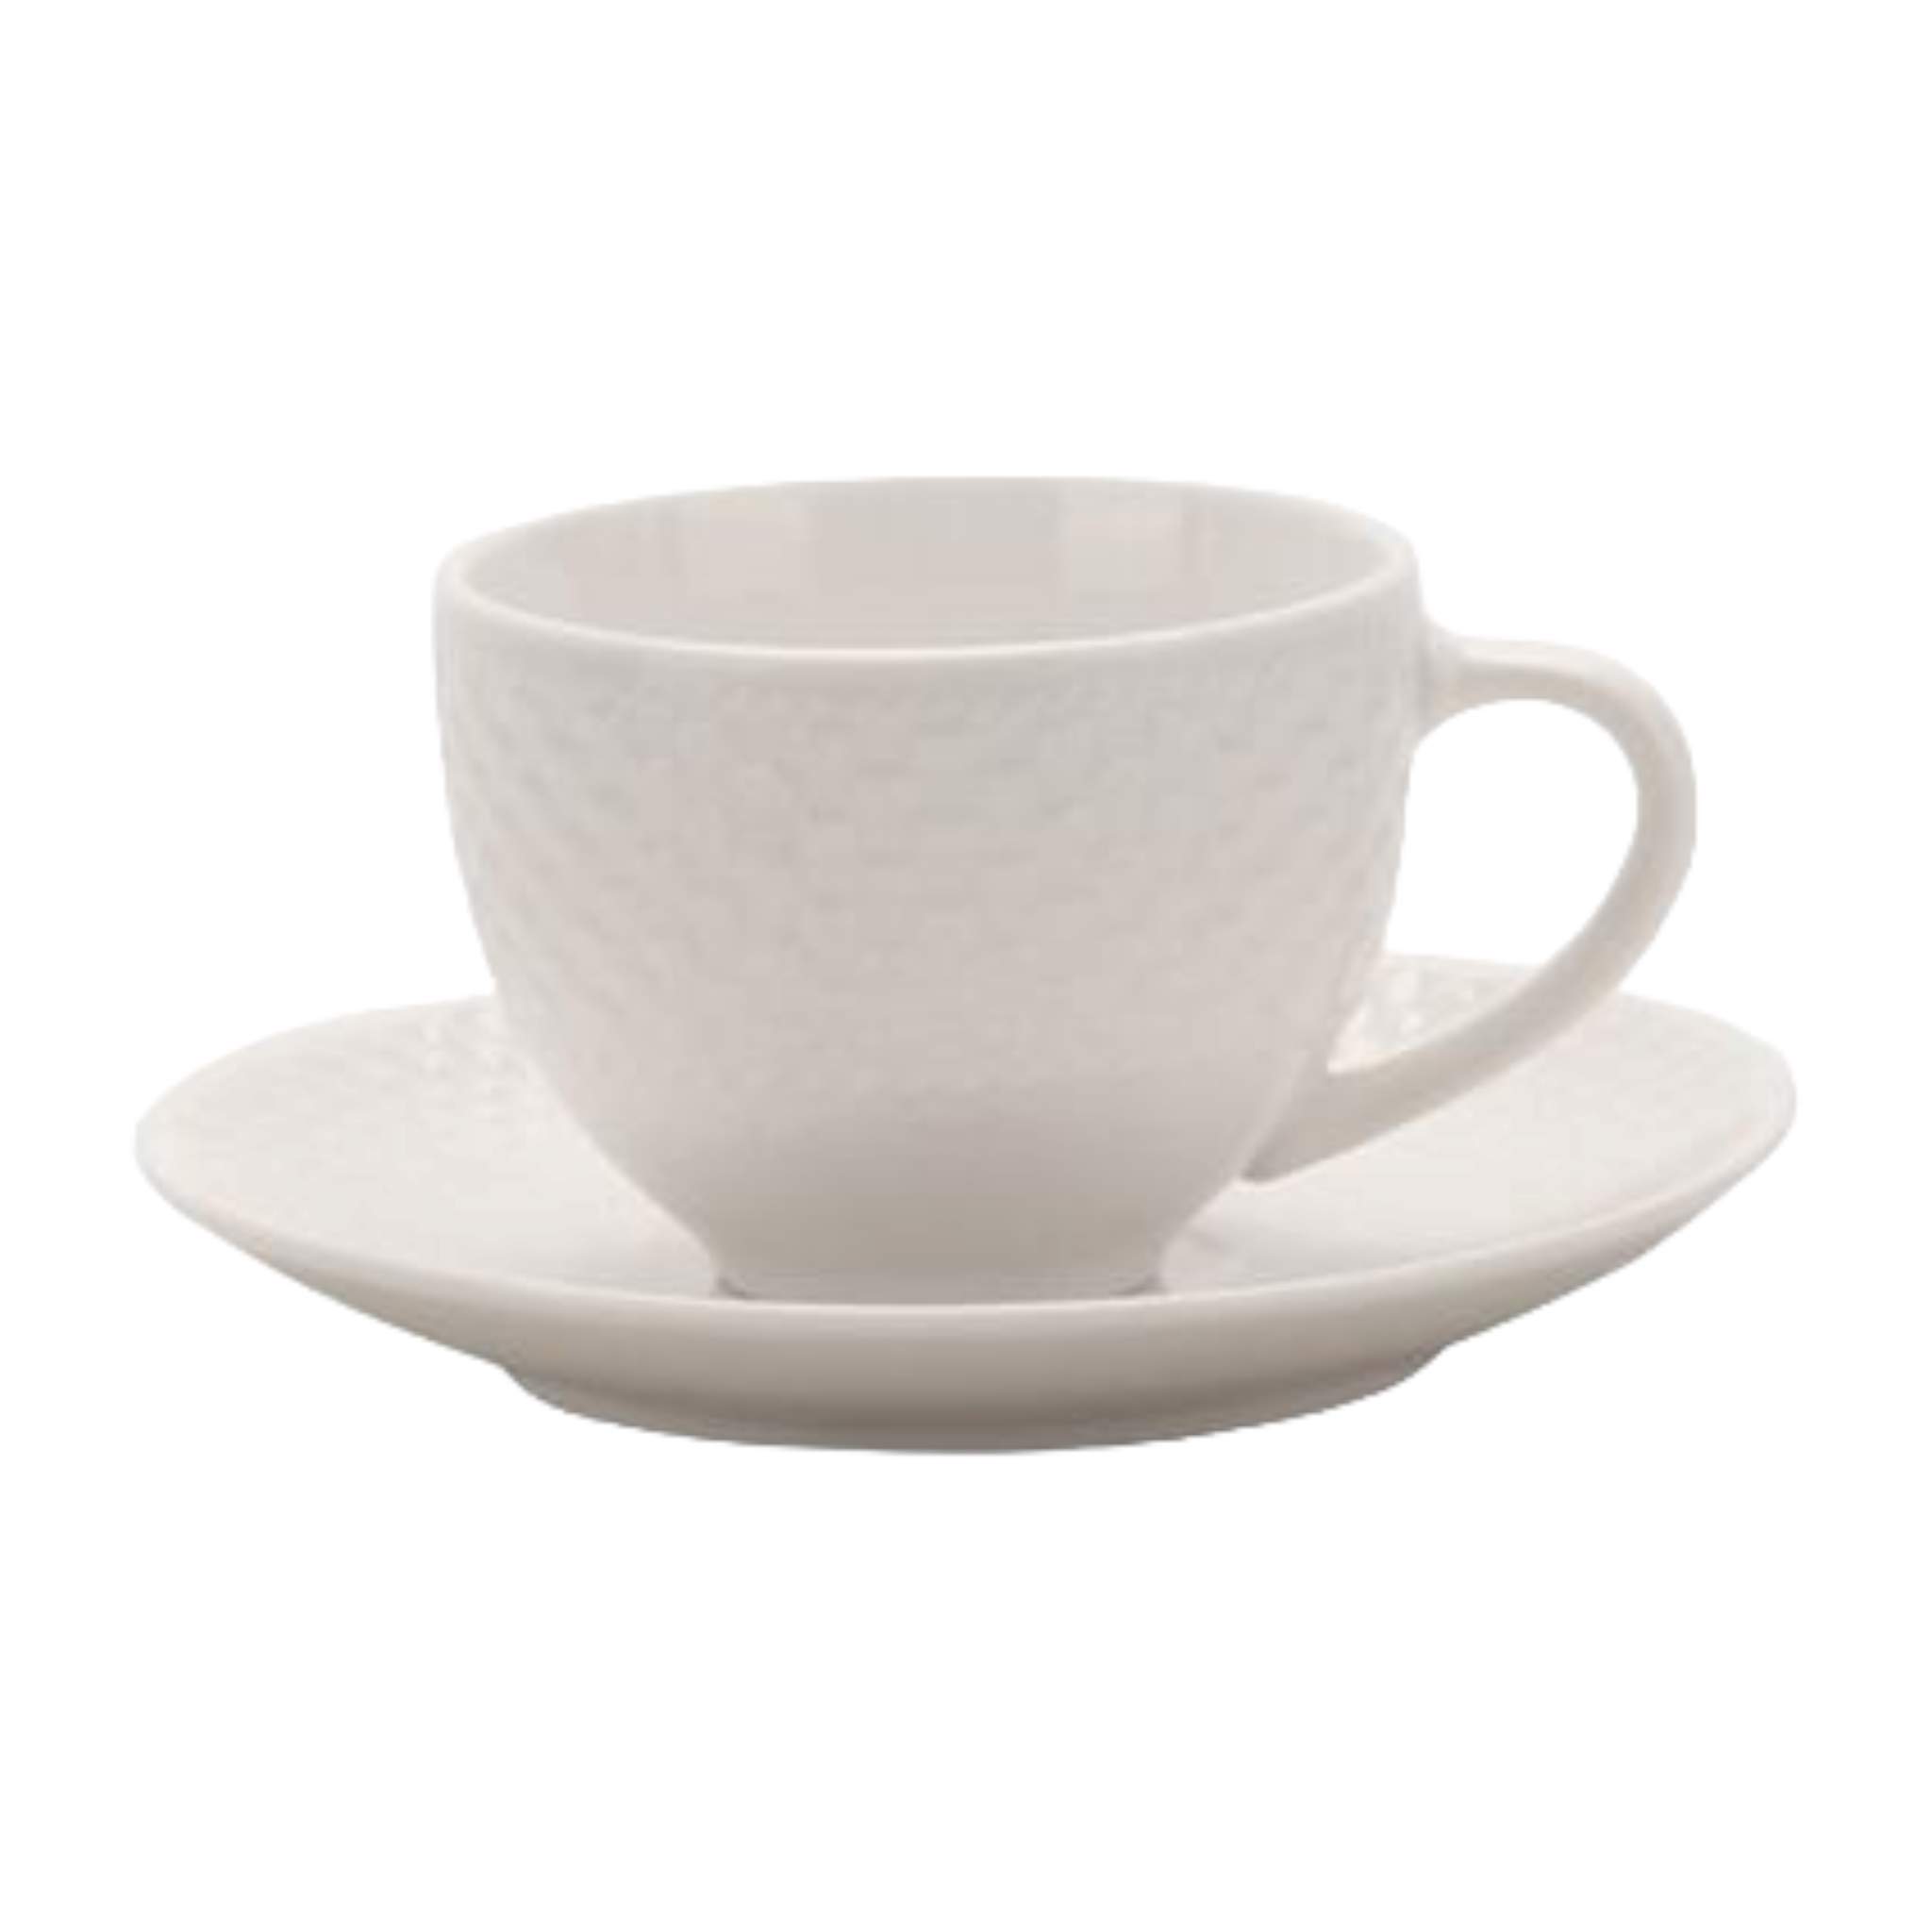 Ceramic Cup and Saucer 260ml White 30641